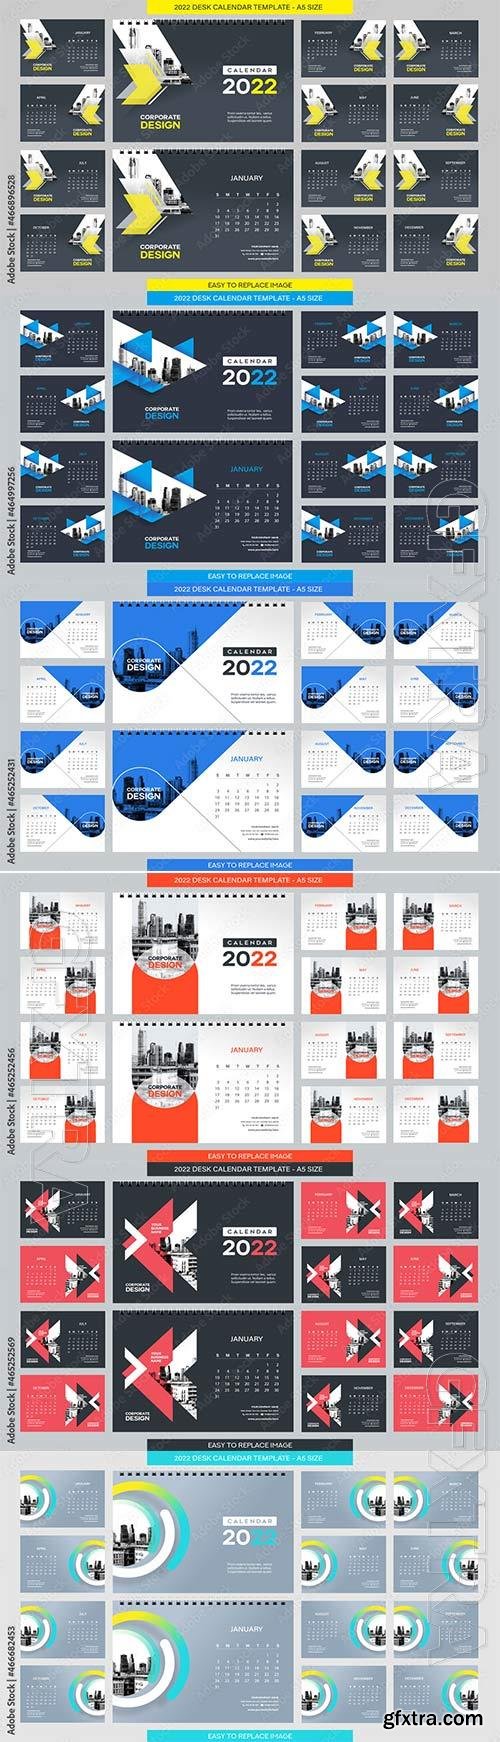 2022 Desk Calendar template - 12 months included - A5 Size